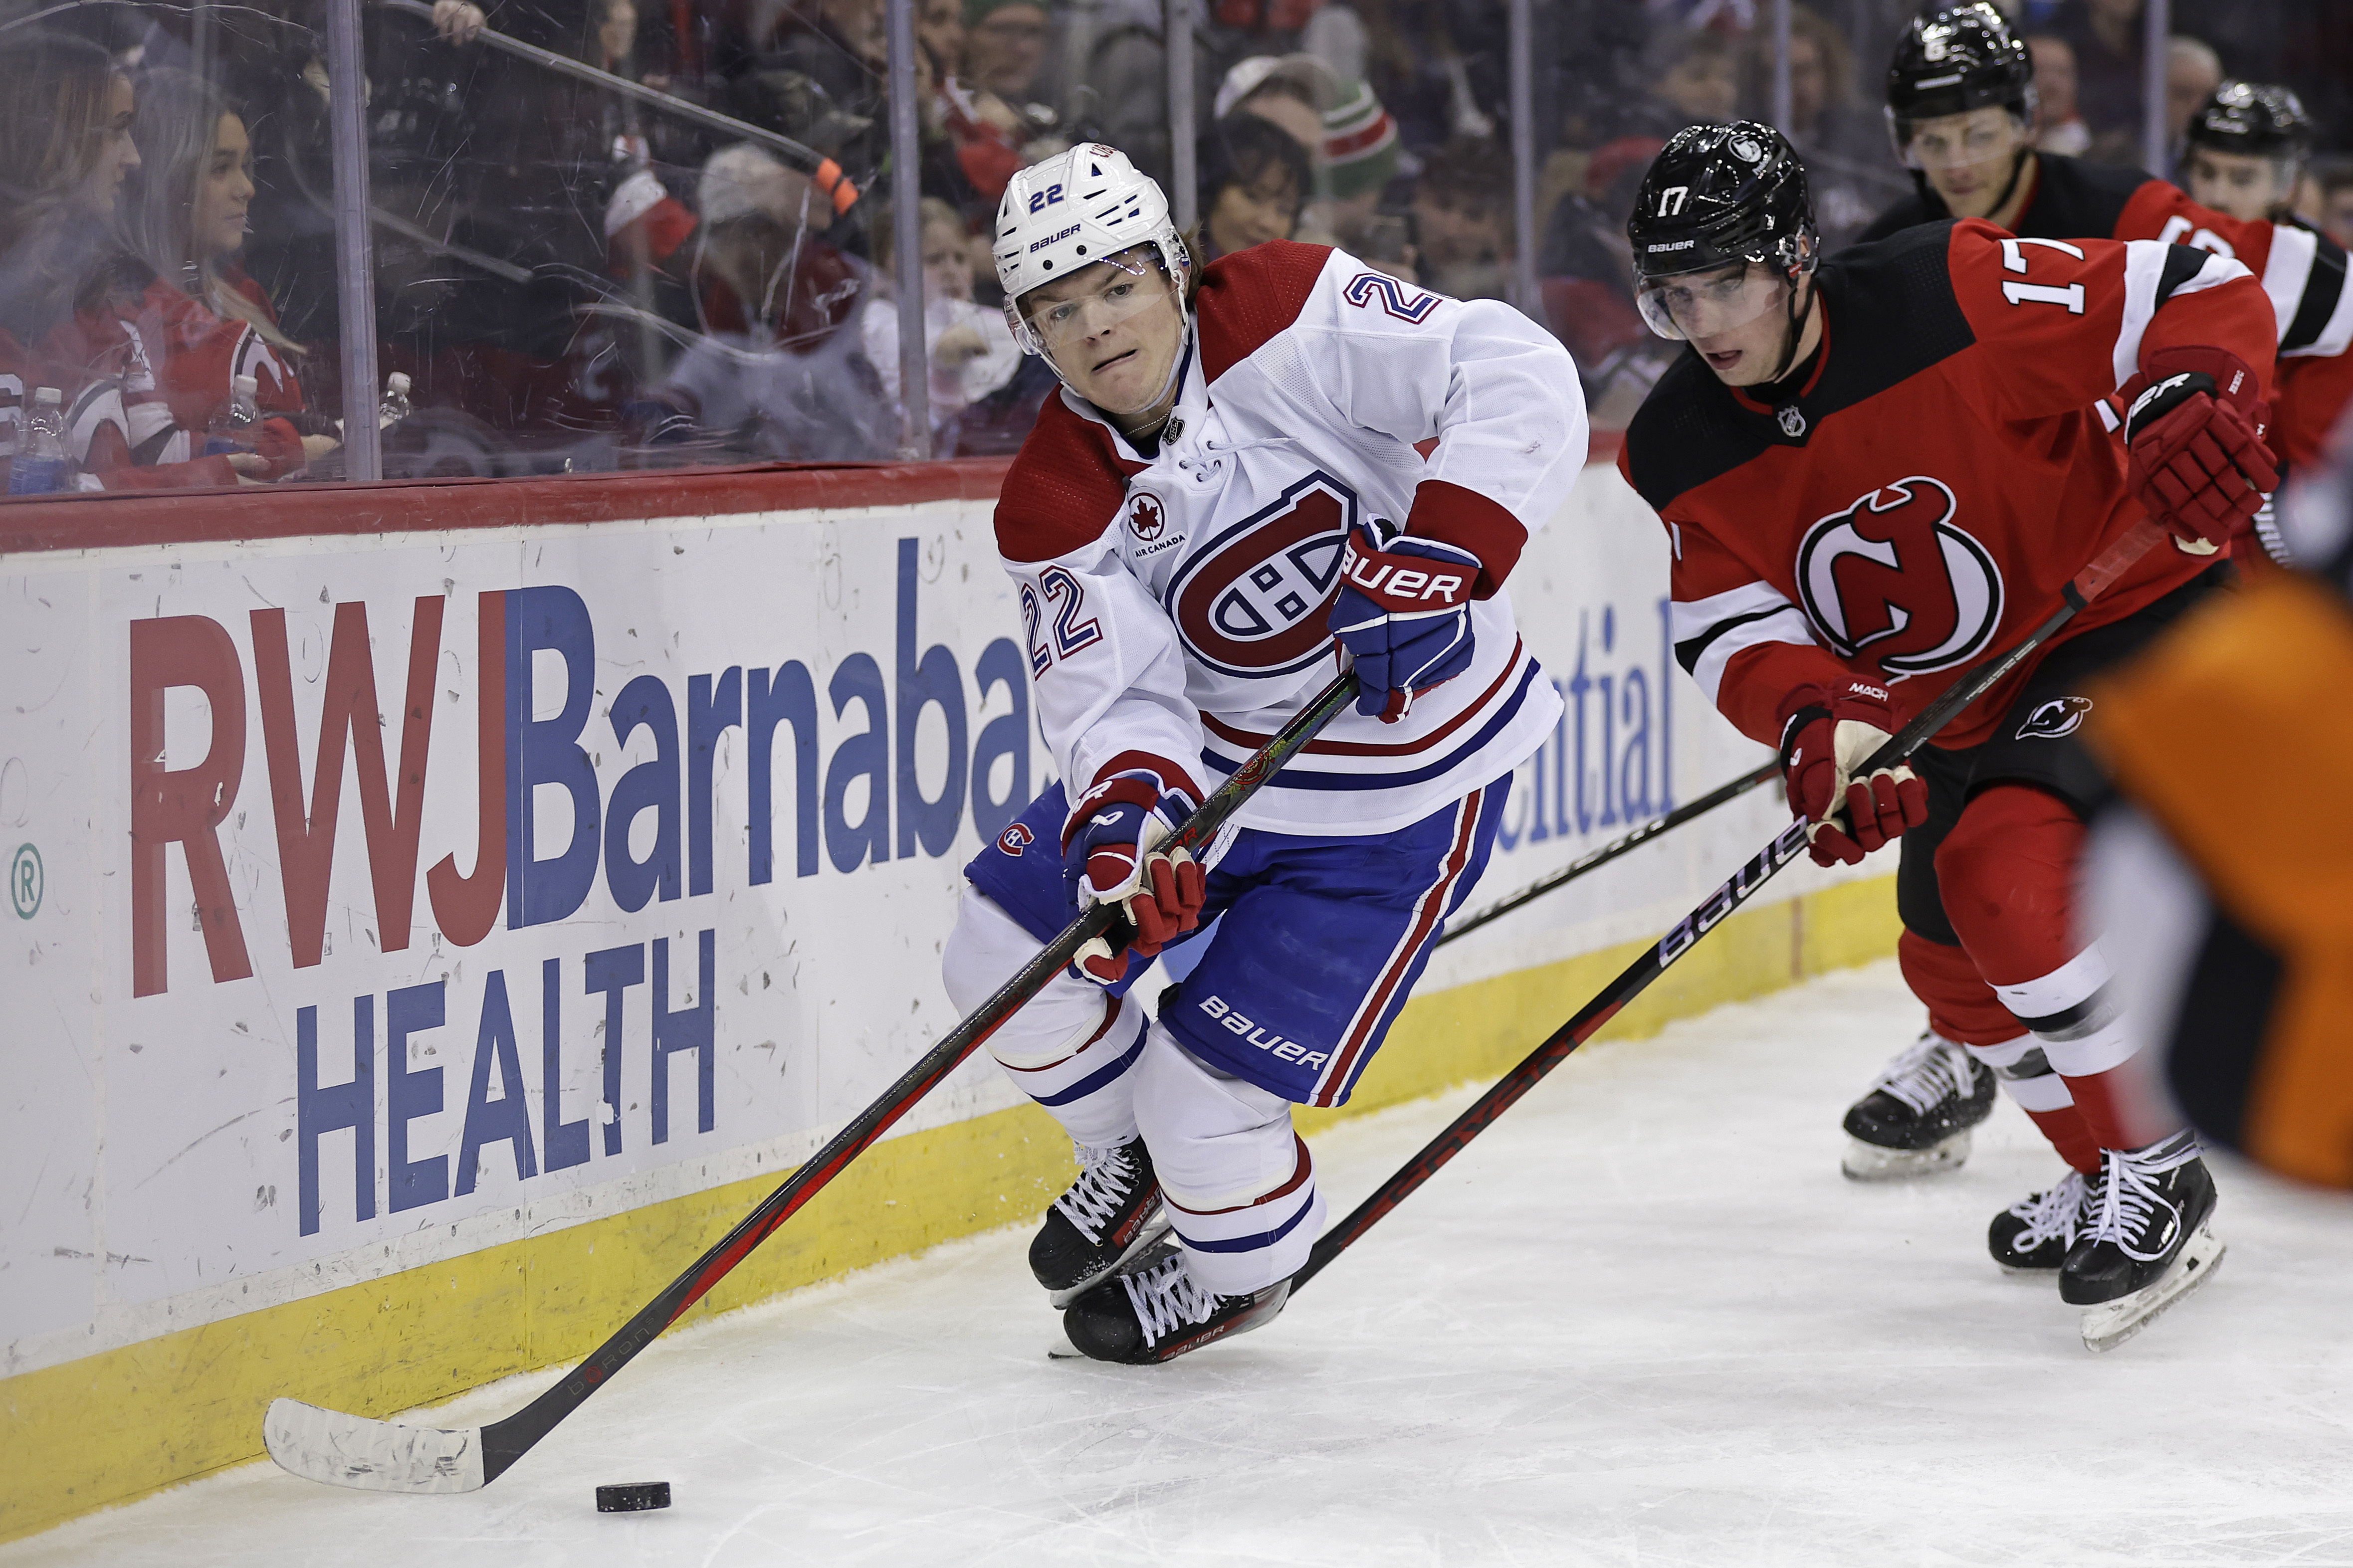 Game Preview: New Jersey Devils at Montreal Canadiens - All About